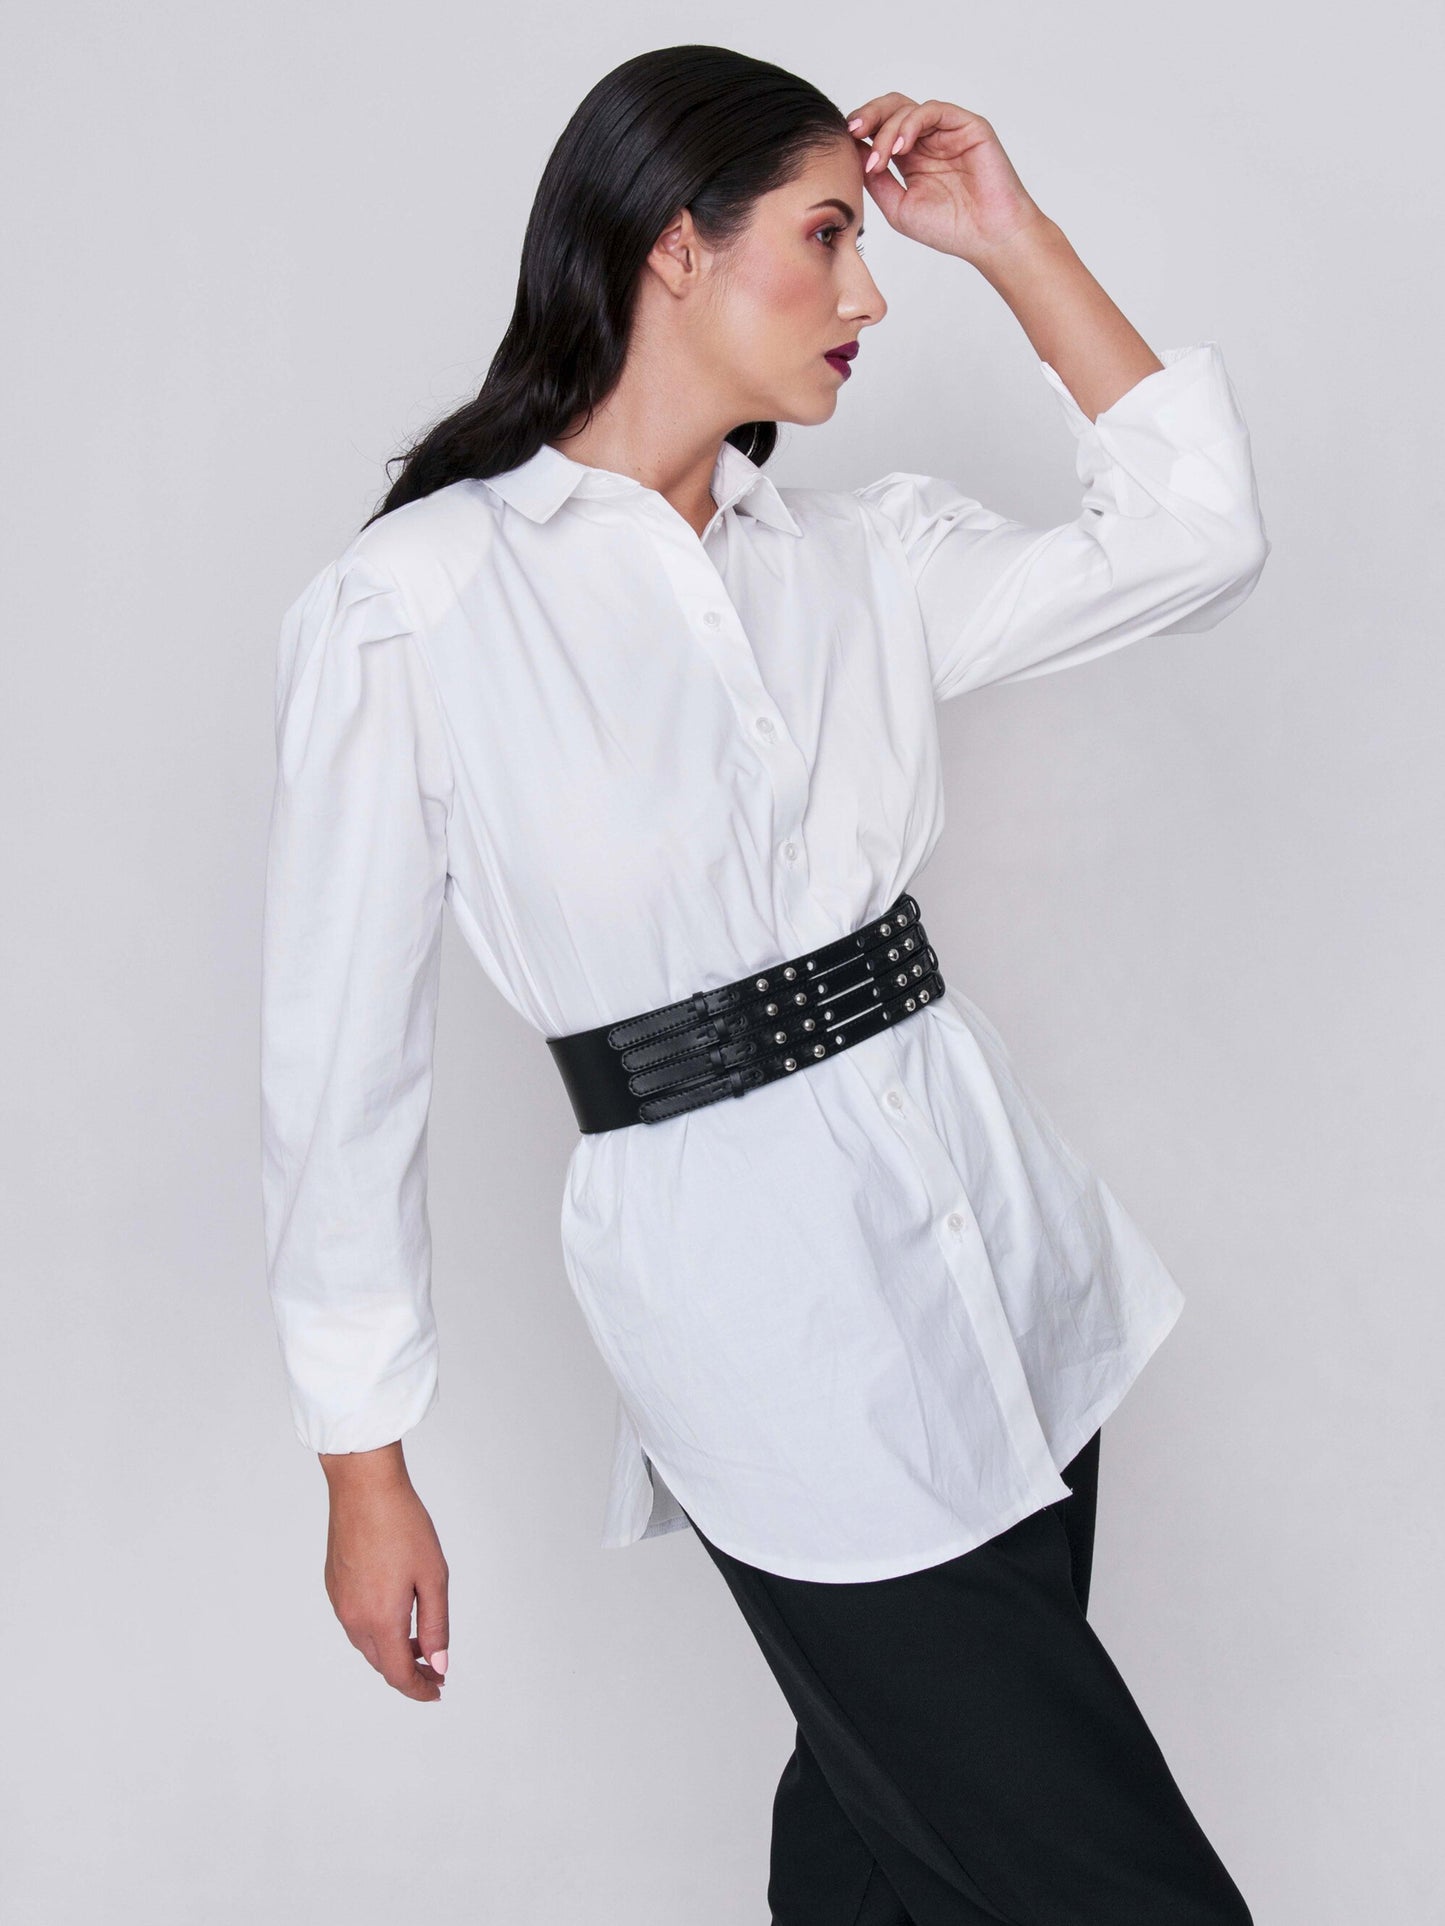 Side view of black leather waist cincher belt worn by a woman over a white shirt.